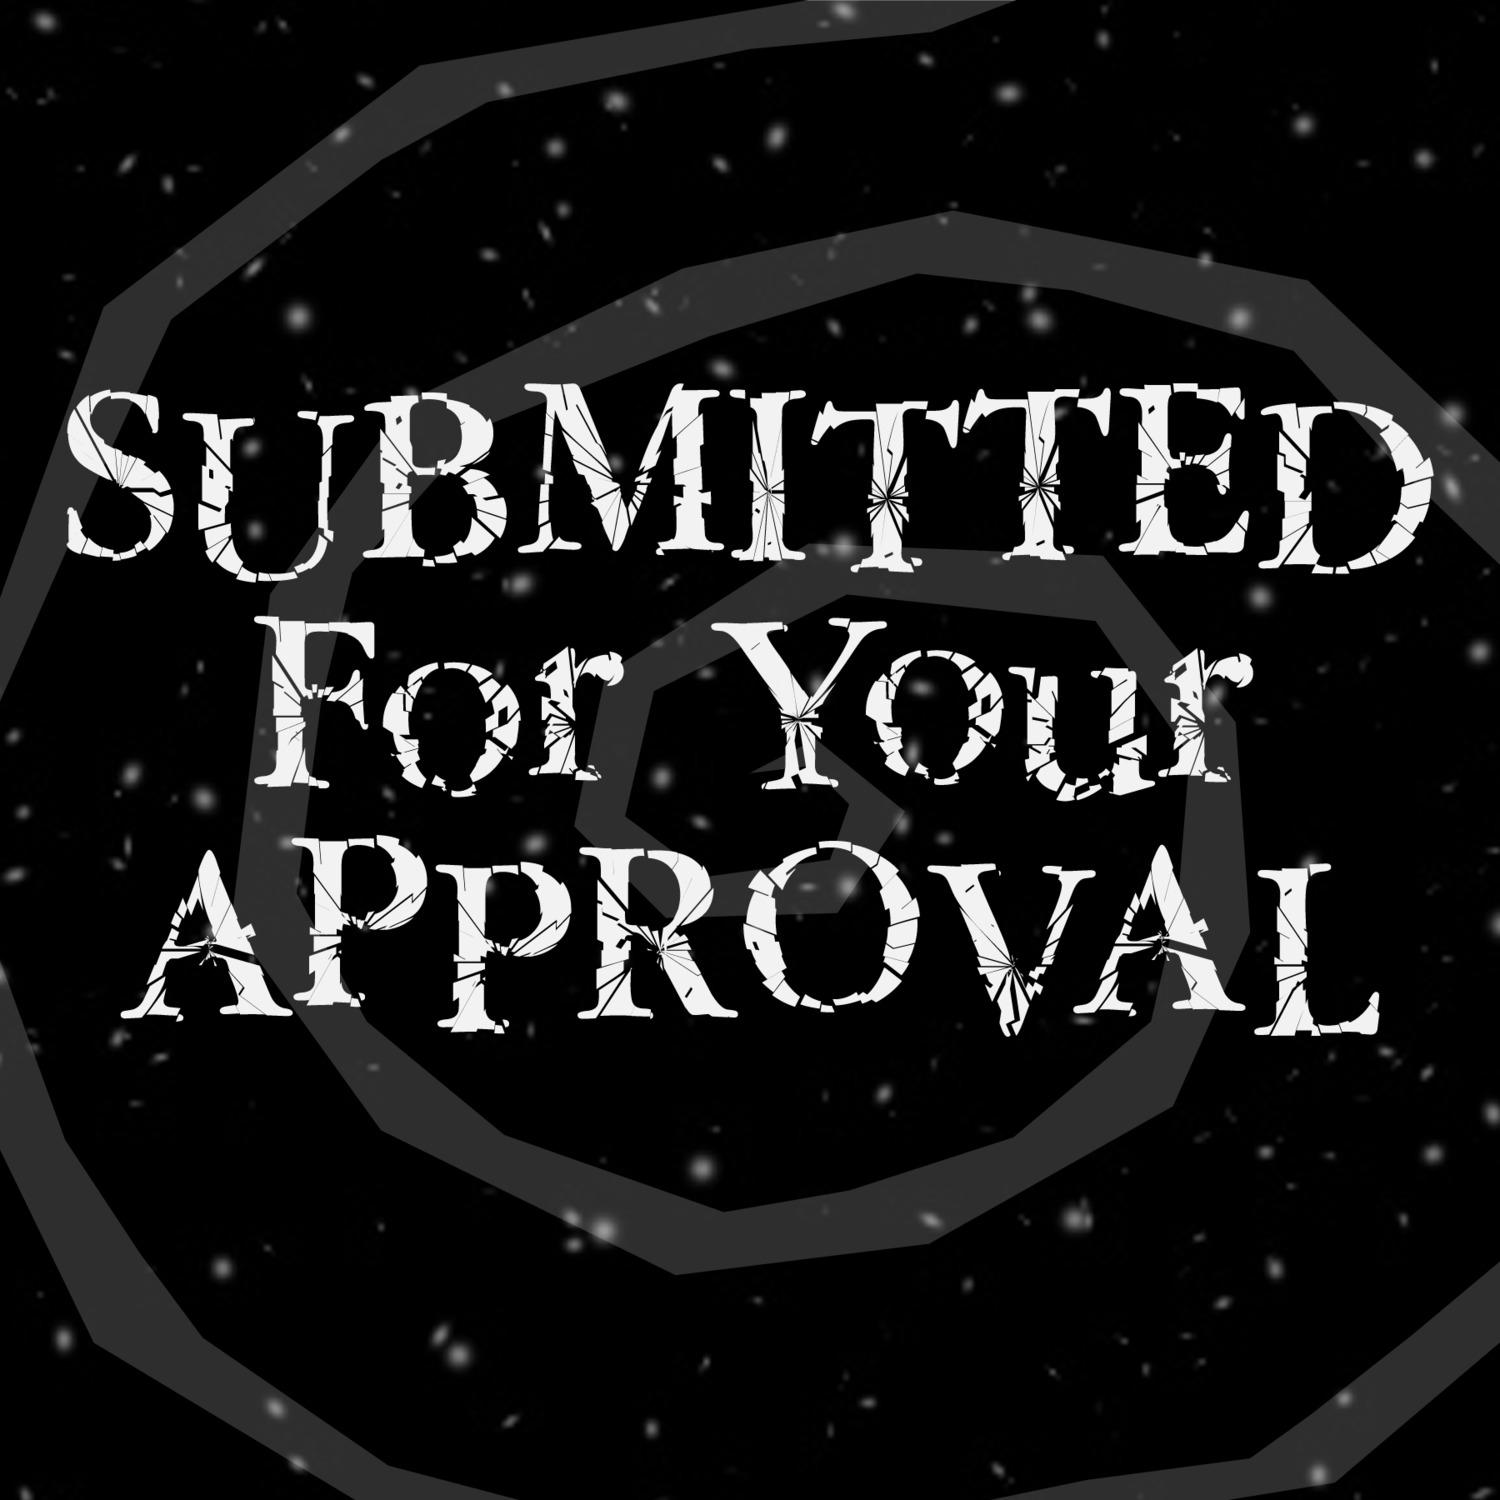 Submitted For Your Approval - A Twilight Zone Podcast